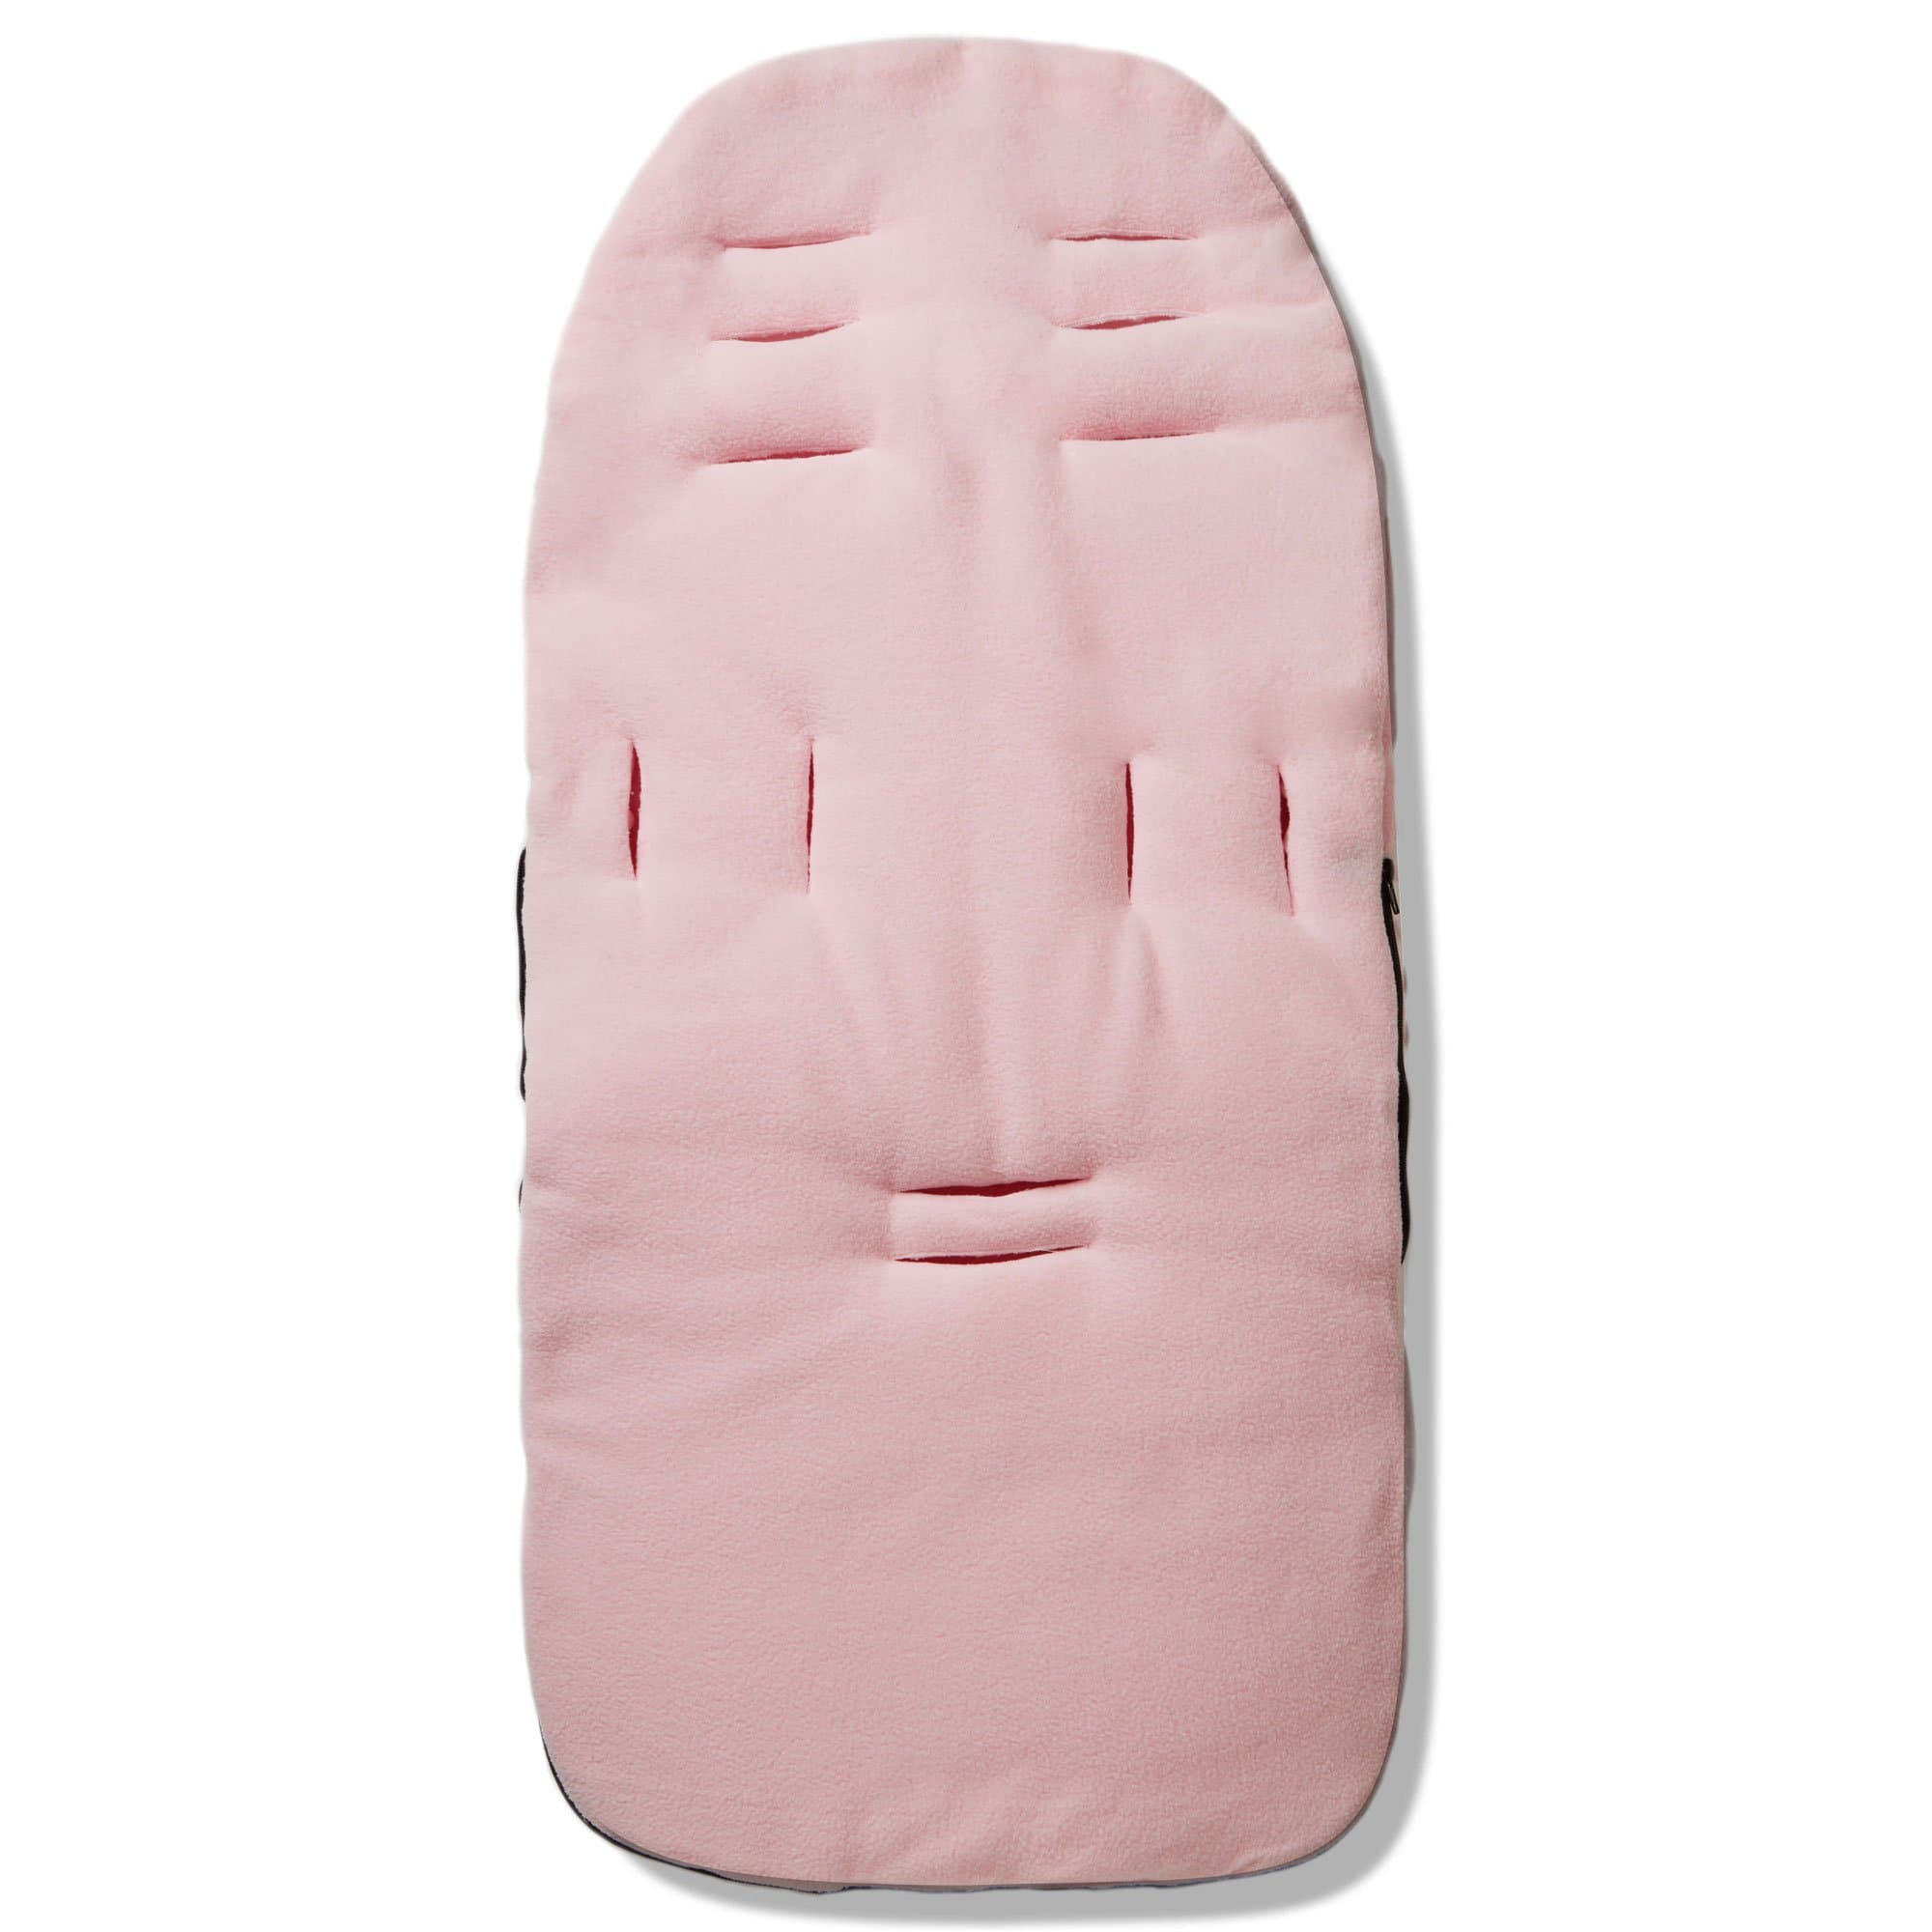 Dimple Footmuff / Cosy Toes Compatible with Koelstra - For Your Little One